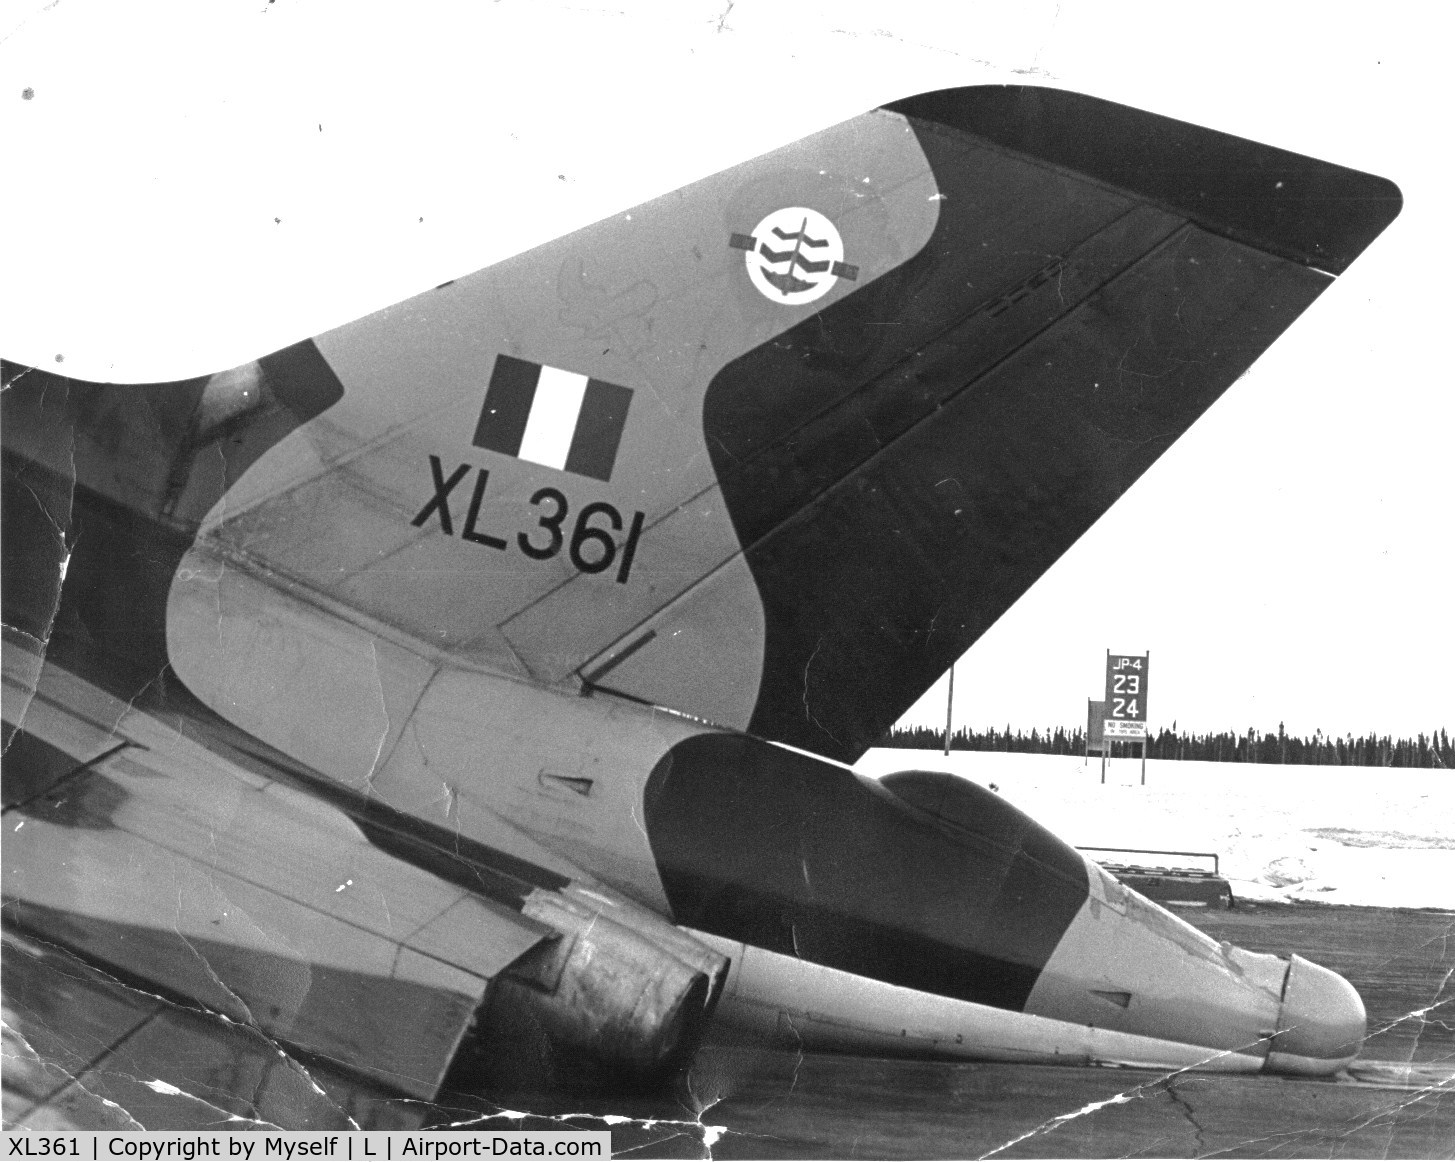 XL361, 1962 Avro Vulcan B.2 C/N Set 33, Unattended by the Crewchief one day at Goose Bay, she refuelled the rear tanks first. One of her well known habits! After the repair she was 18 inches longer than other Vulcans! With one and a half tons of kit further aft made no difference to the trim.